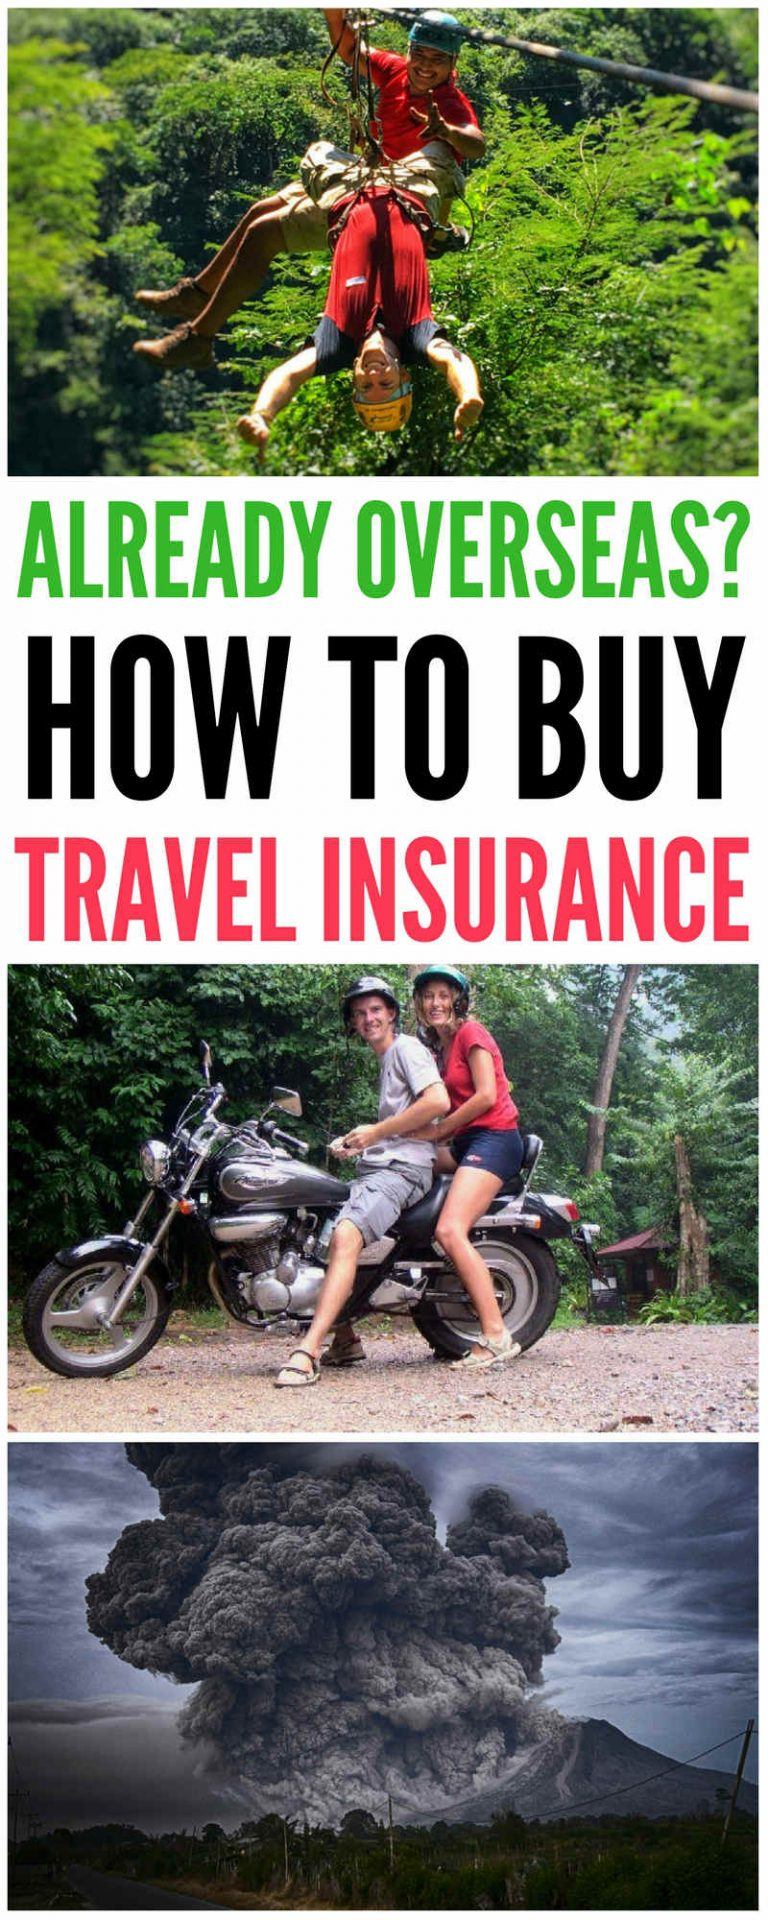 travel insurance if already abroad